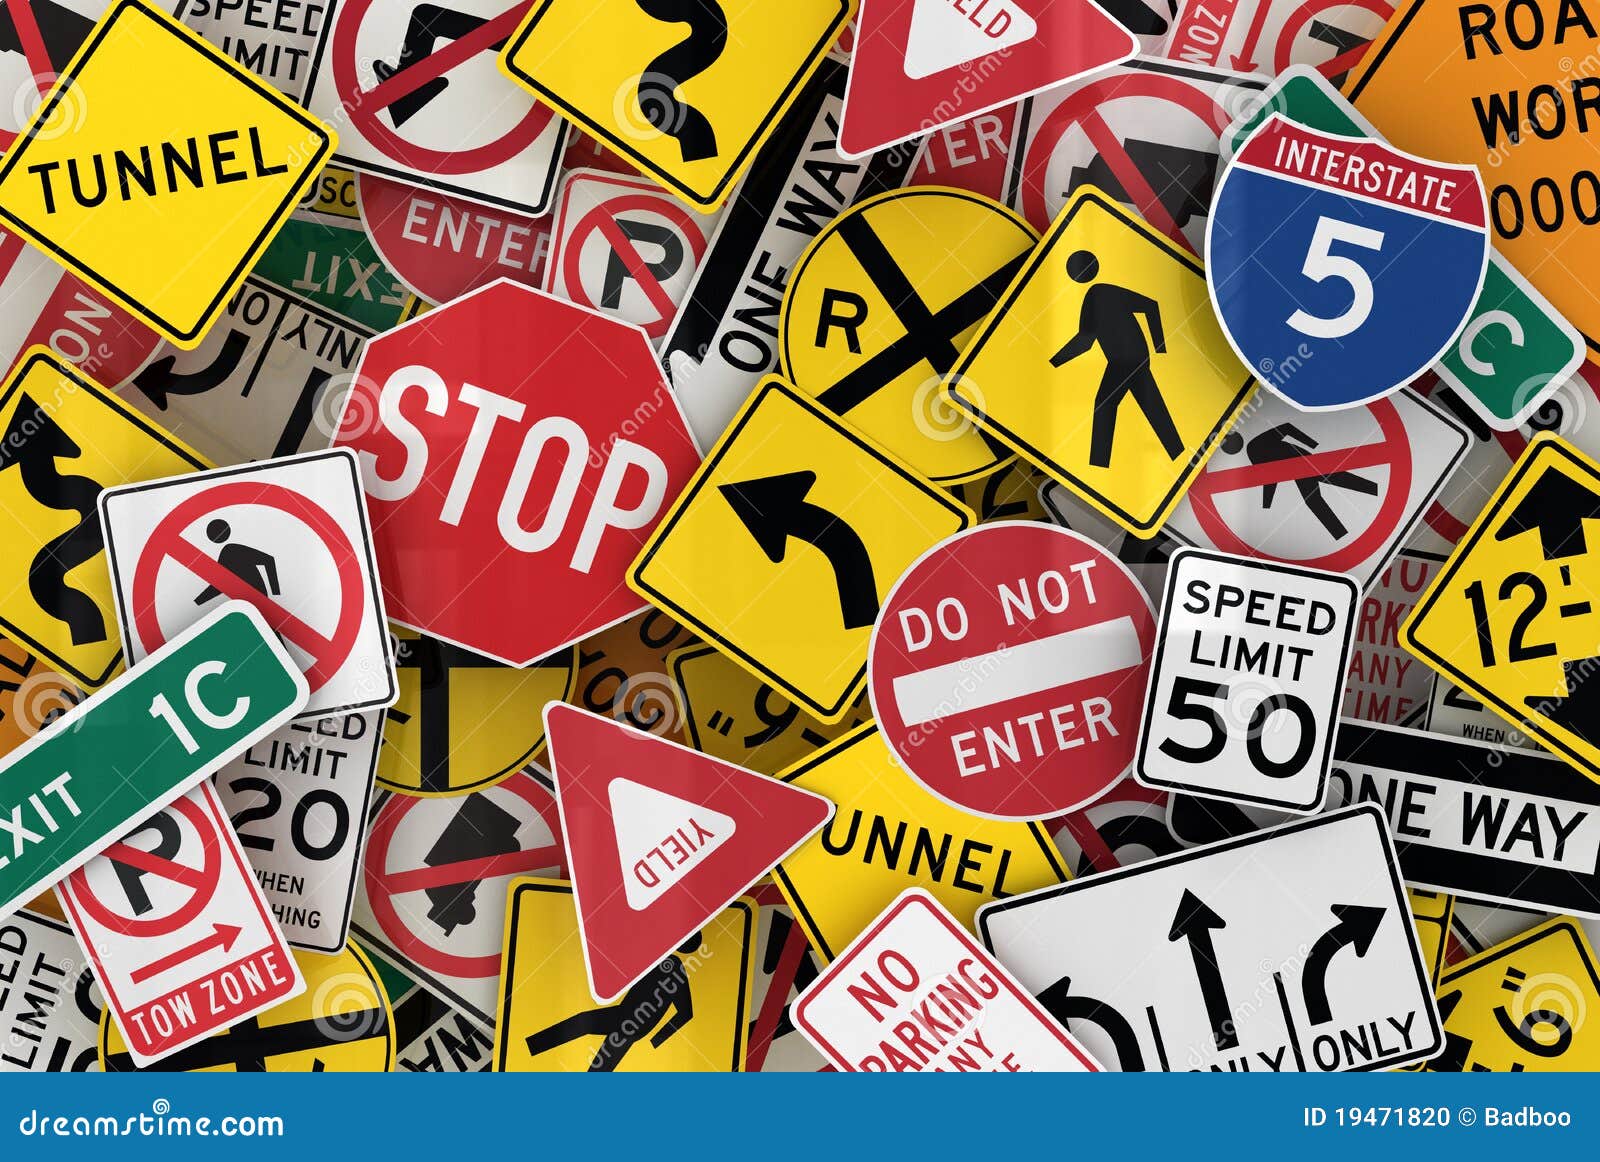 American Traffic Signs Stock Photo - Image: 19471820